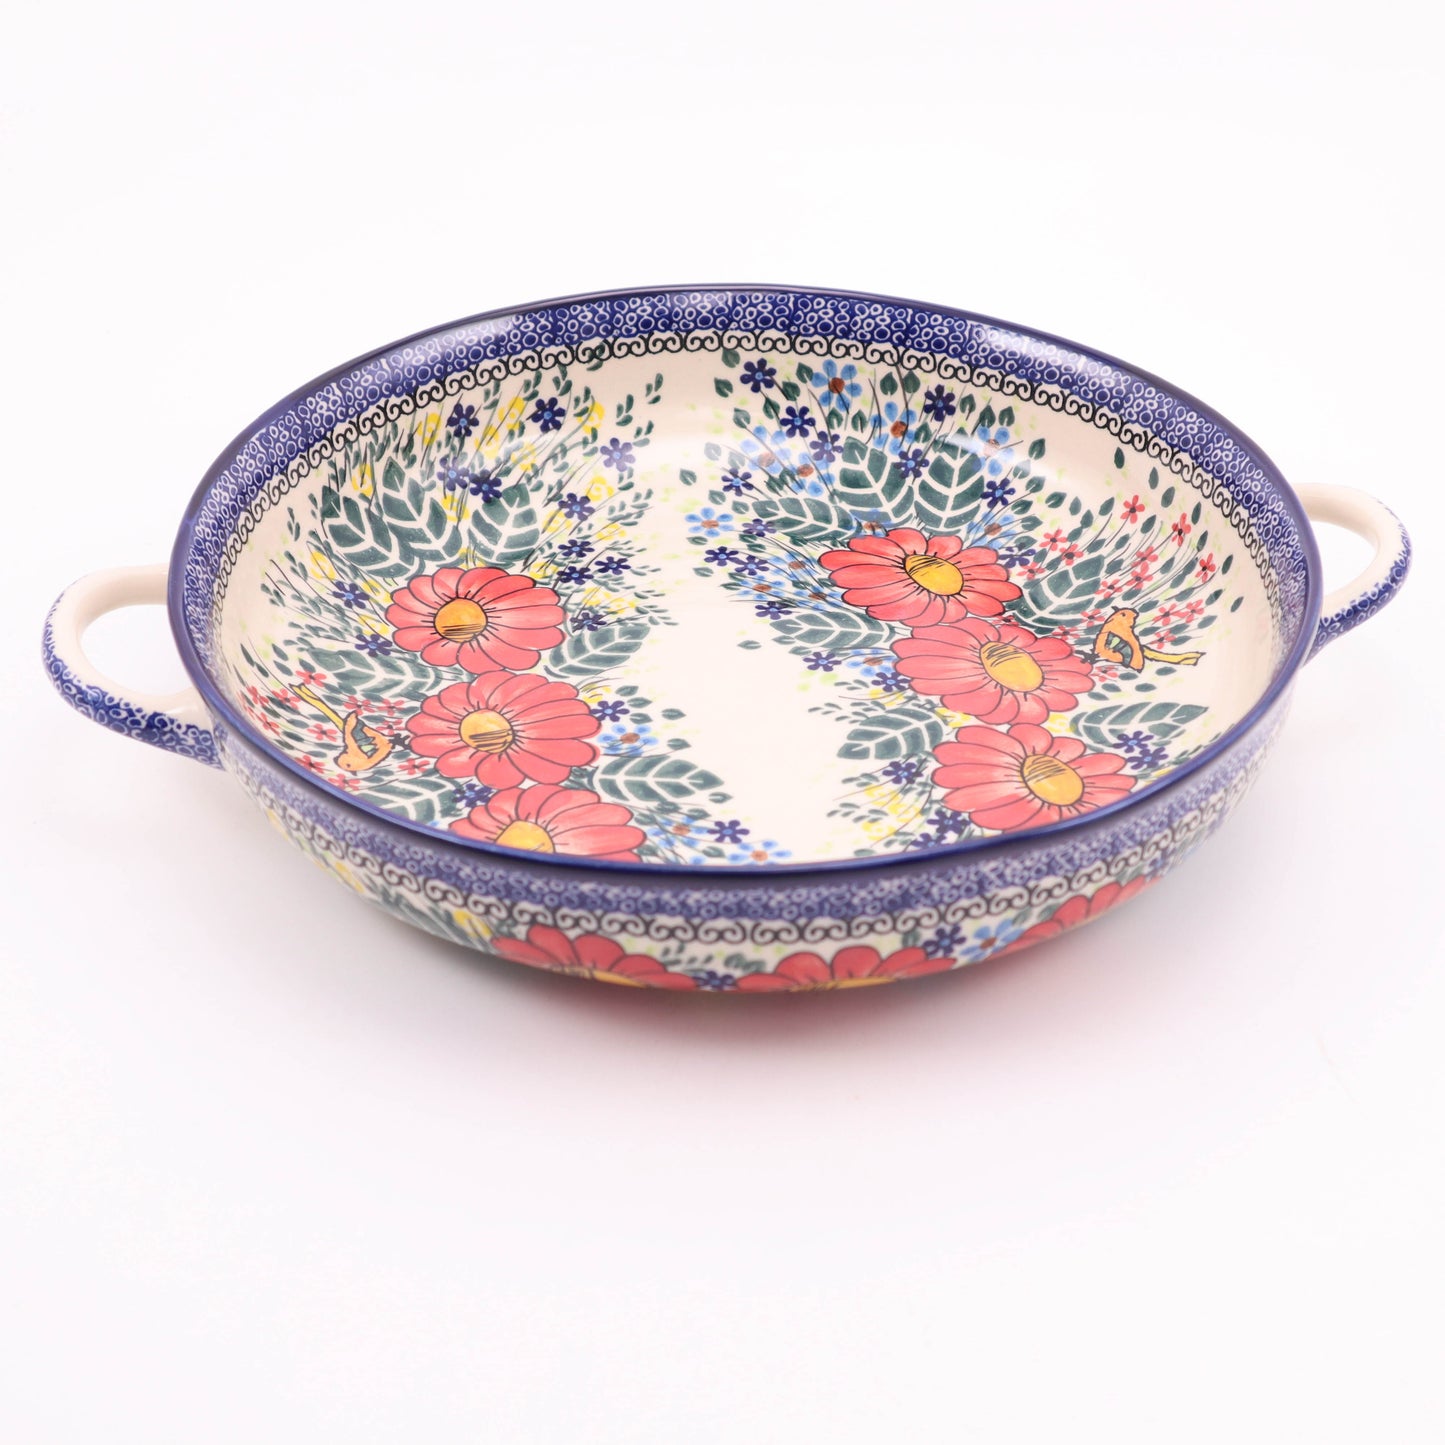 10.5" Round Baker With Handles Pattern: A20